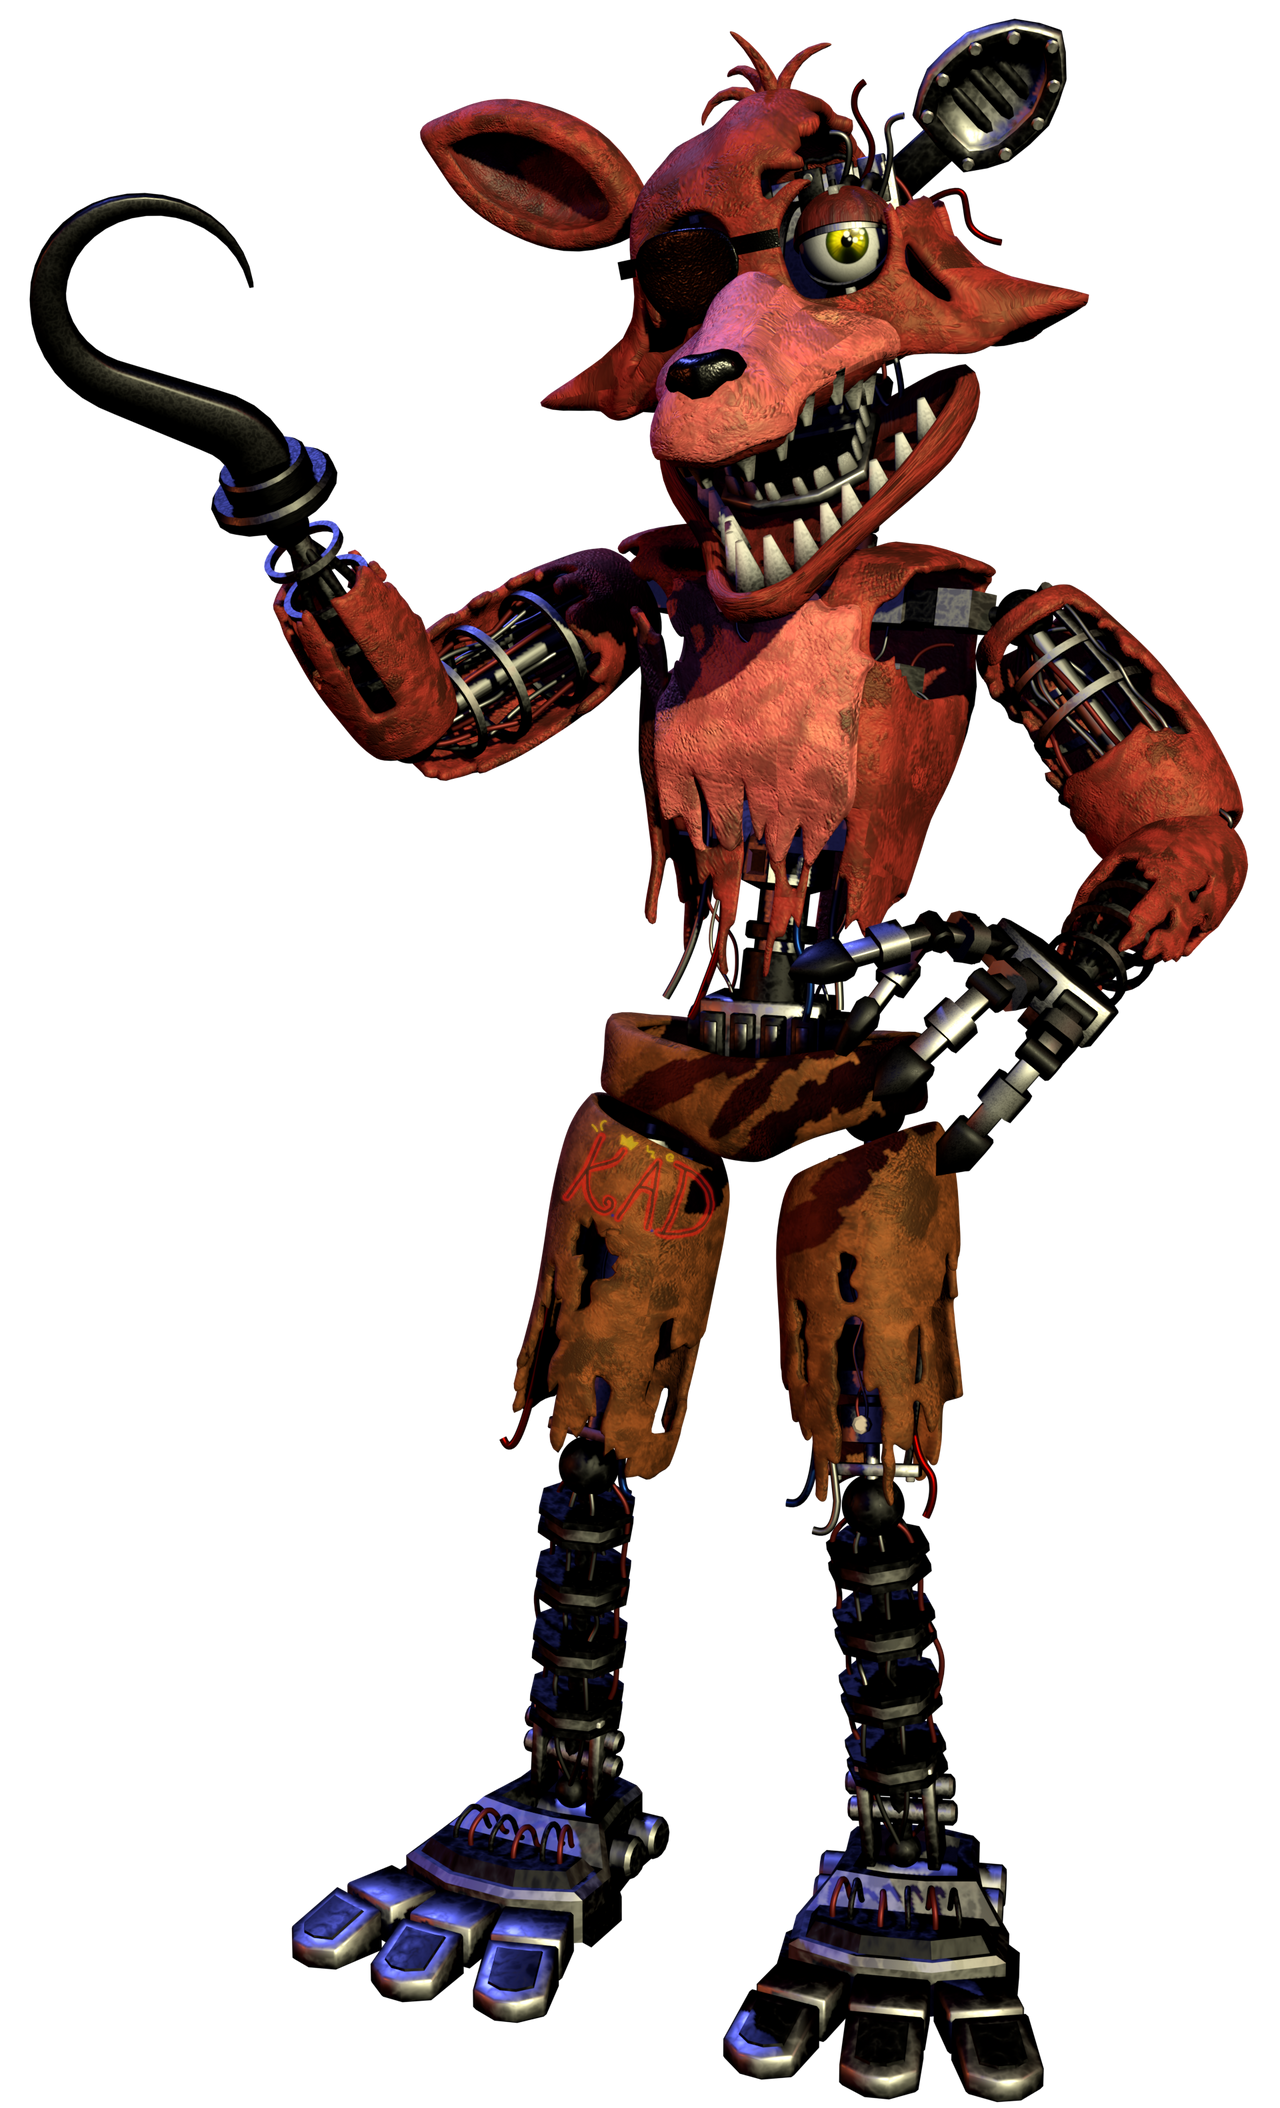 Withered Foxy by KingPhantom23 on DeviantArt